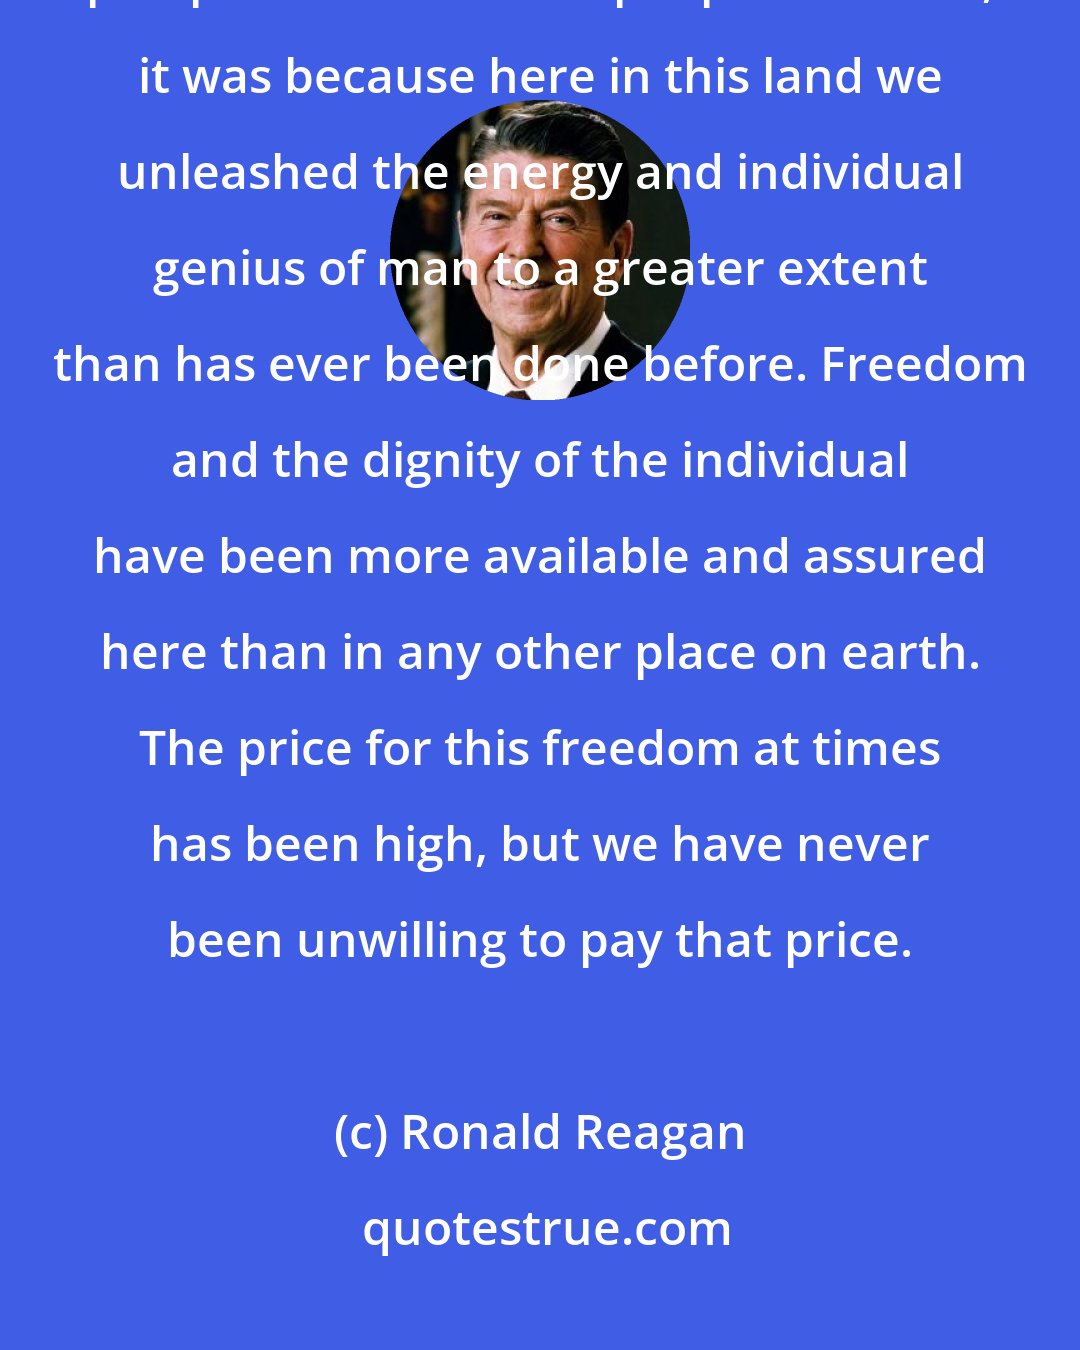 Ronald Reagan: If we look to the answer as to why for so many years we achieved so much, prospered as no other people on earth, it was because here in this land we unleashed the energy and individual genius of man to a greater extent than has ever been done before. Freedom and the dignity of the individual have been more available and assured here than in any other place on earth. The price for this freedom at times has been high, but we have never been unwilling to pay that price.